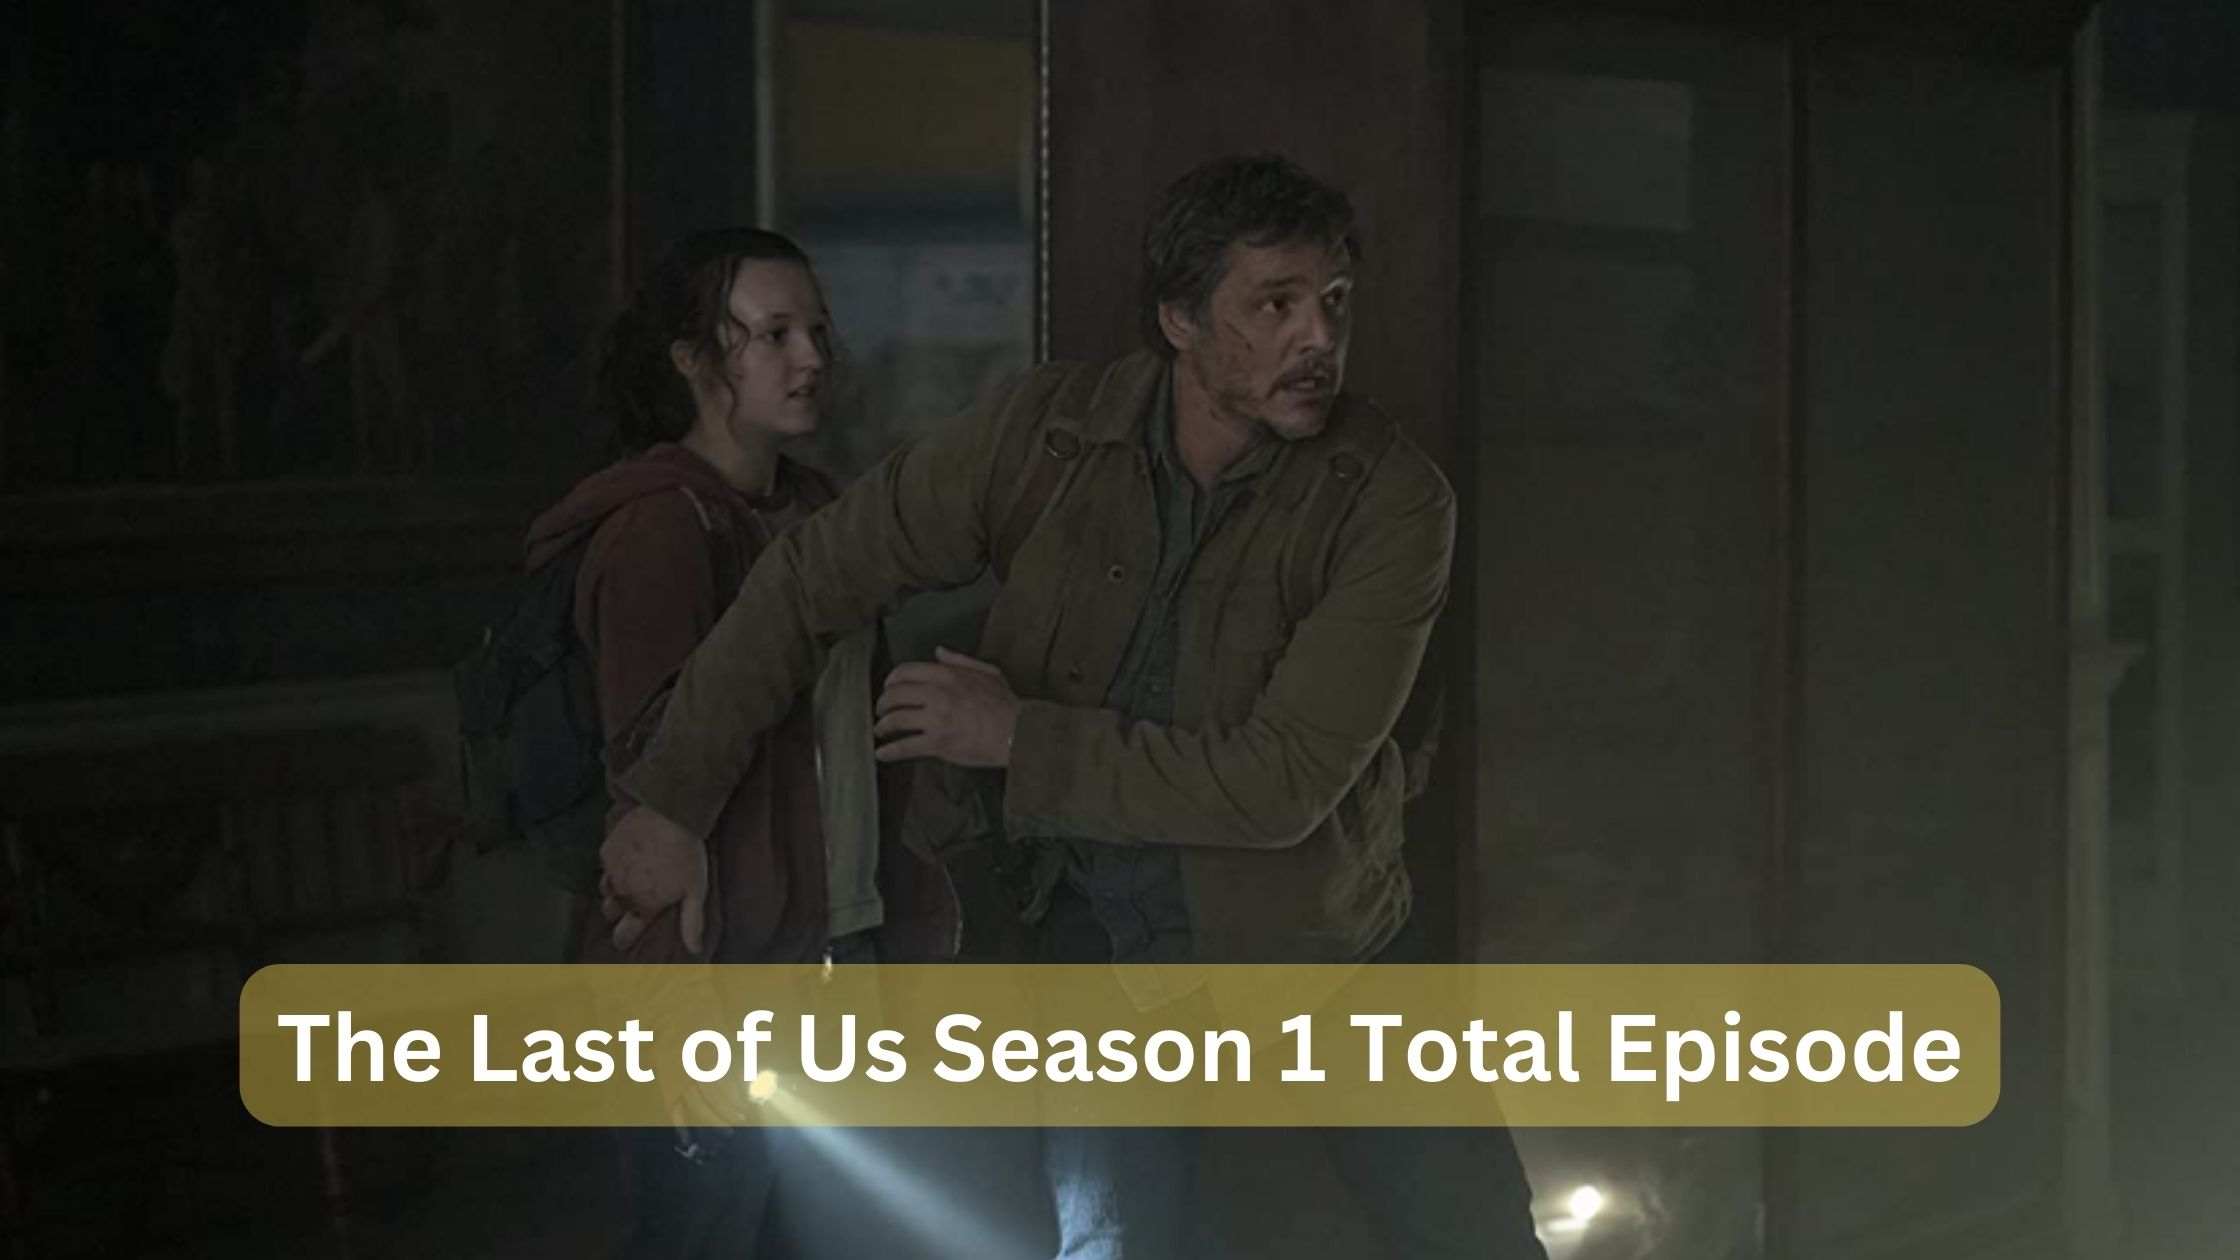 The Last of Us Season 1 Total Episode